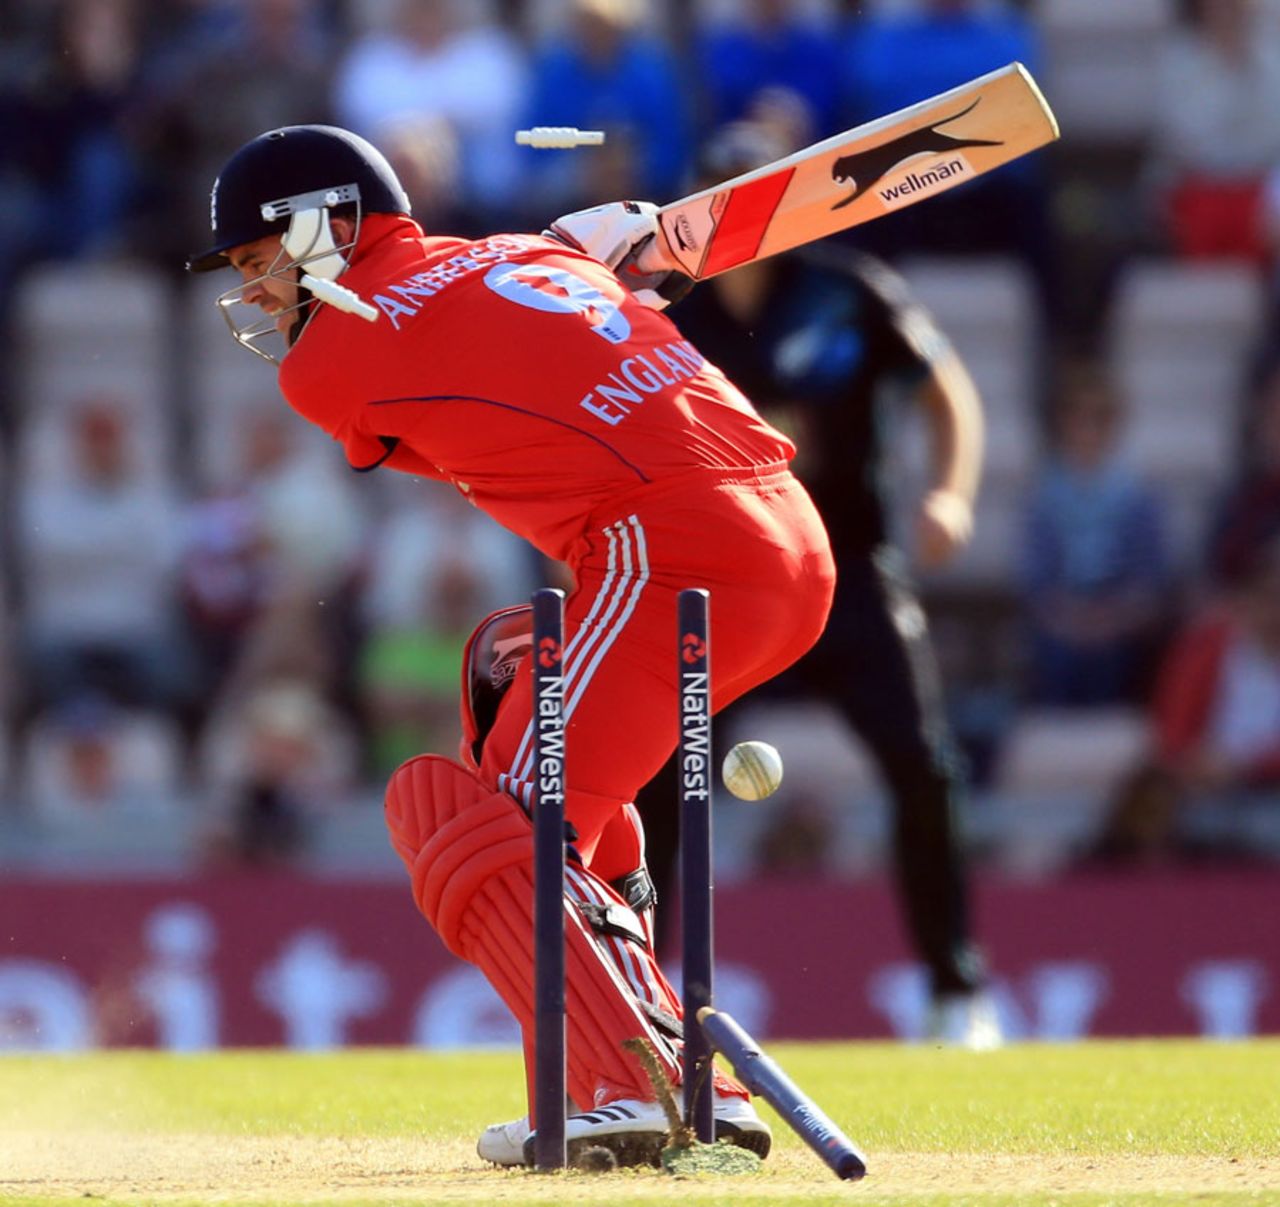 James Anderson gets his middle stump removed, England v New Zealand, 2nd ODI, Ageas Bowl, June 2, 2013